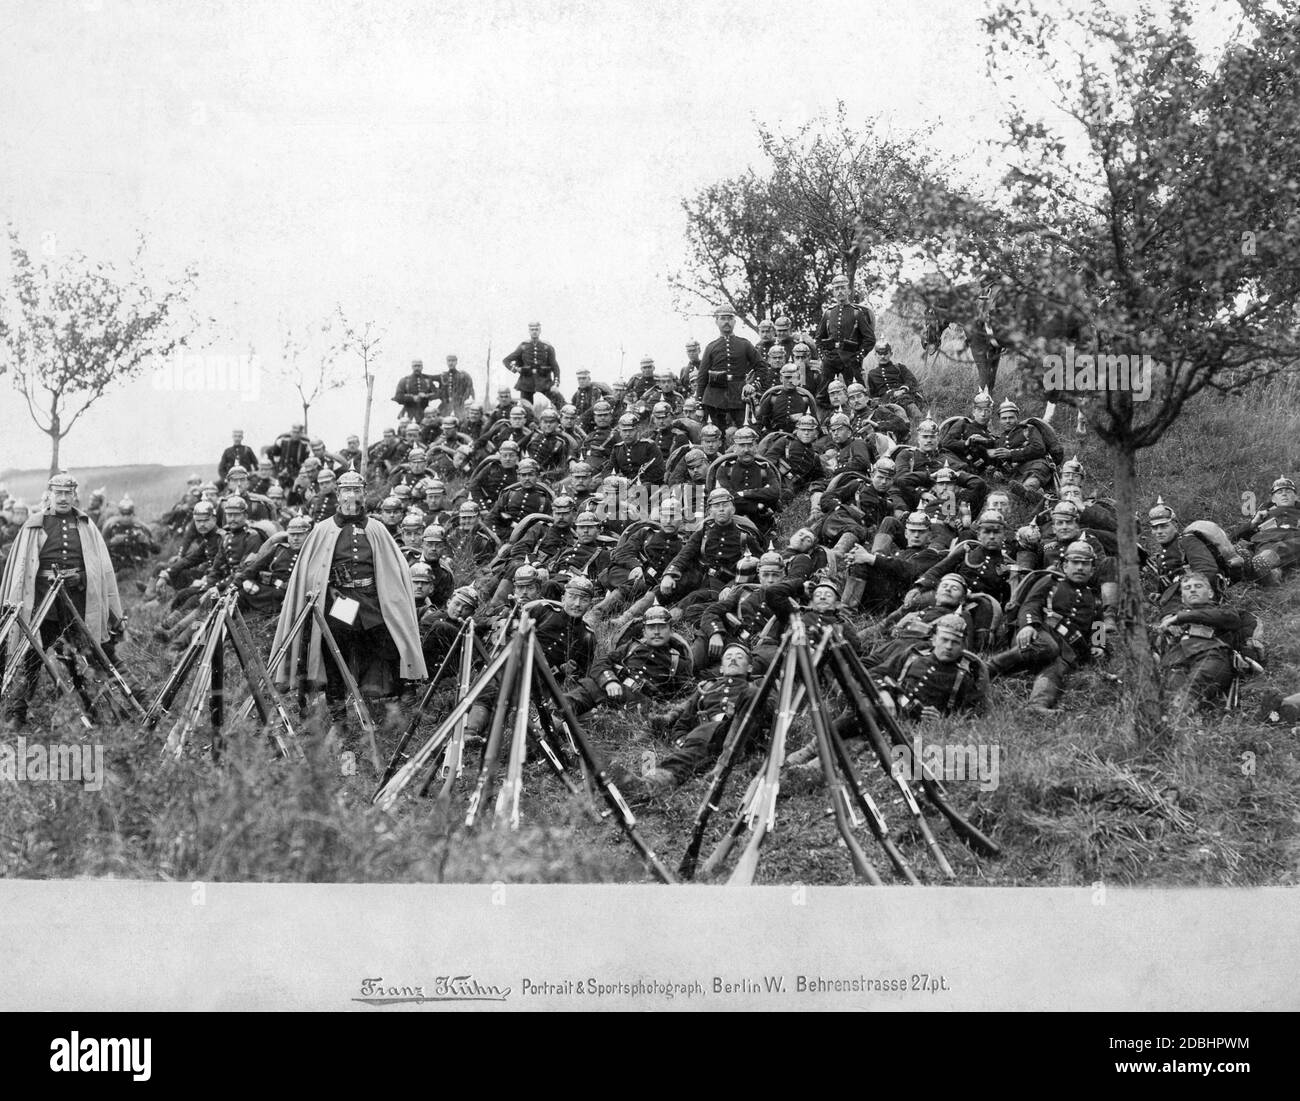 The 6th Company of Luetzow, which belongs to the blue party at the imperial manoeuvre, during a short rest. Stock Photo